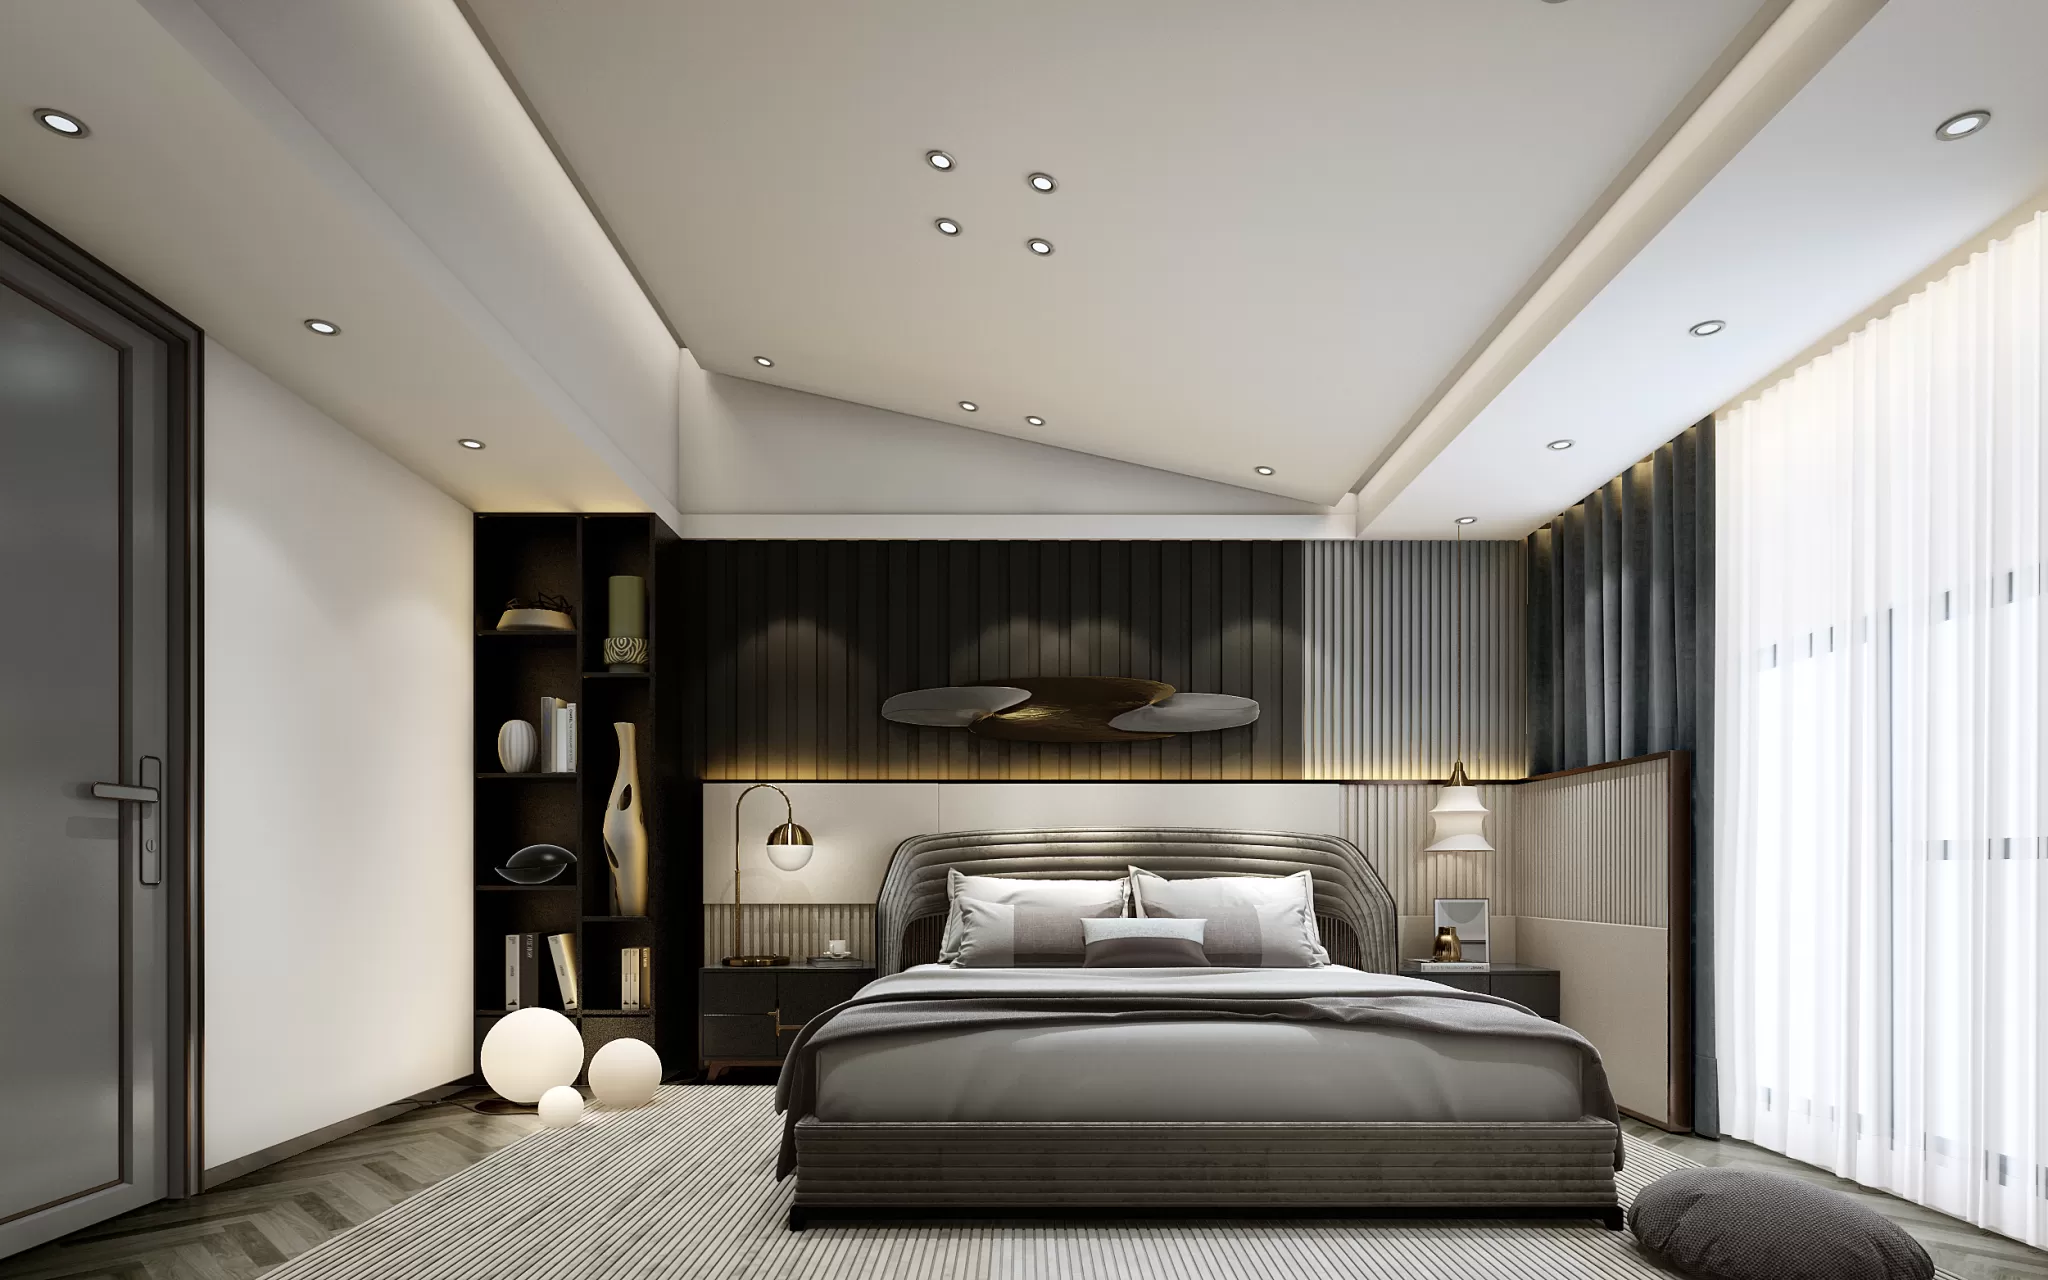 DESMOD INTERIOR 2021 (VRAY)/5. BEDROOM – 2. CHINESE STYLES – 167